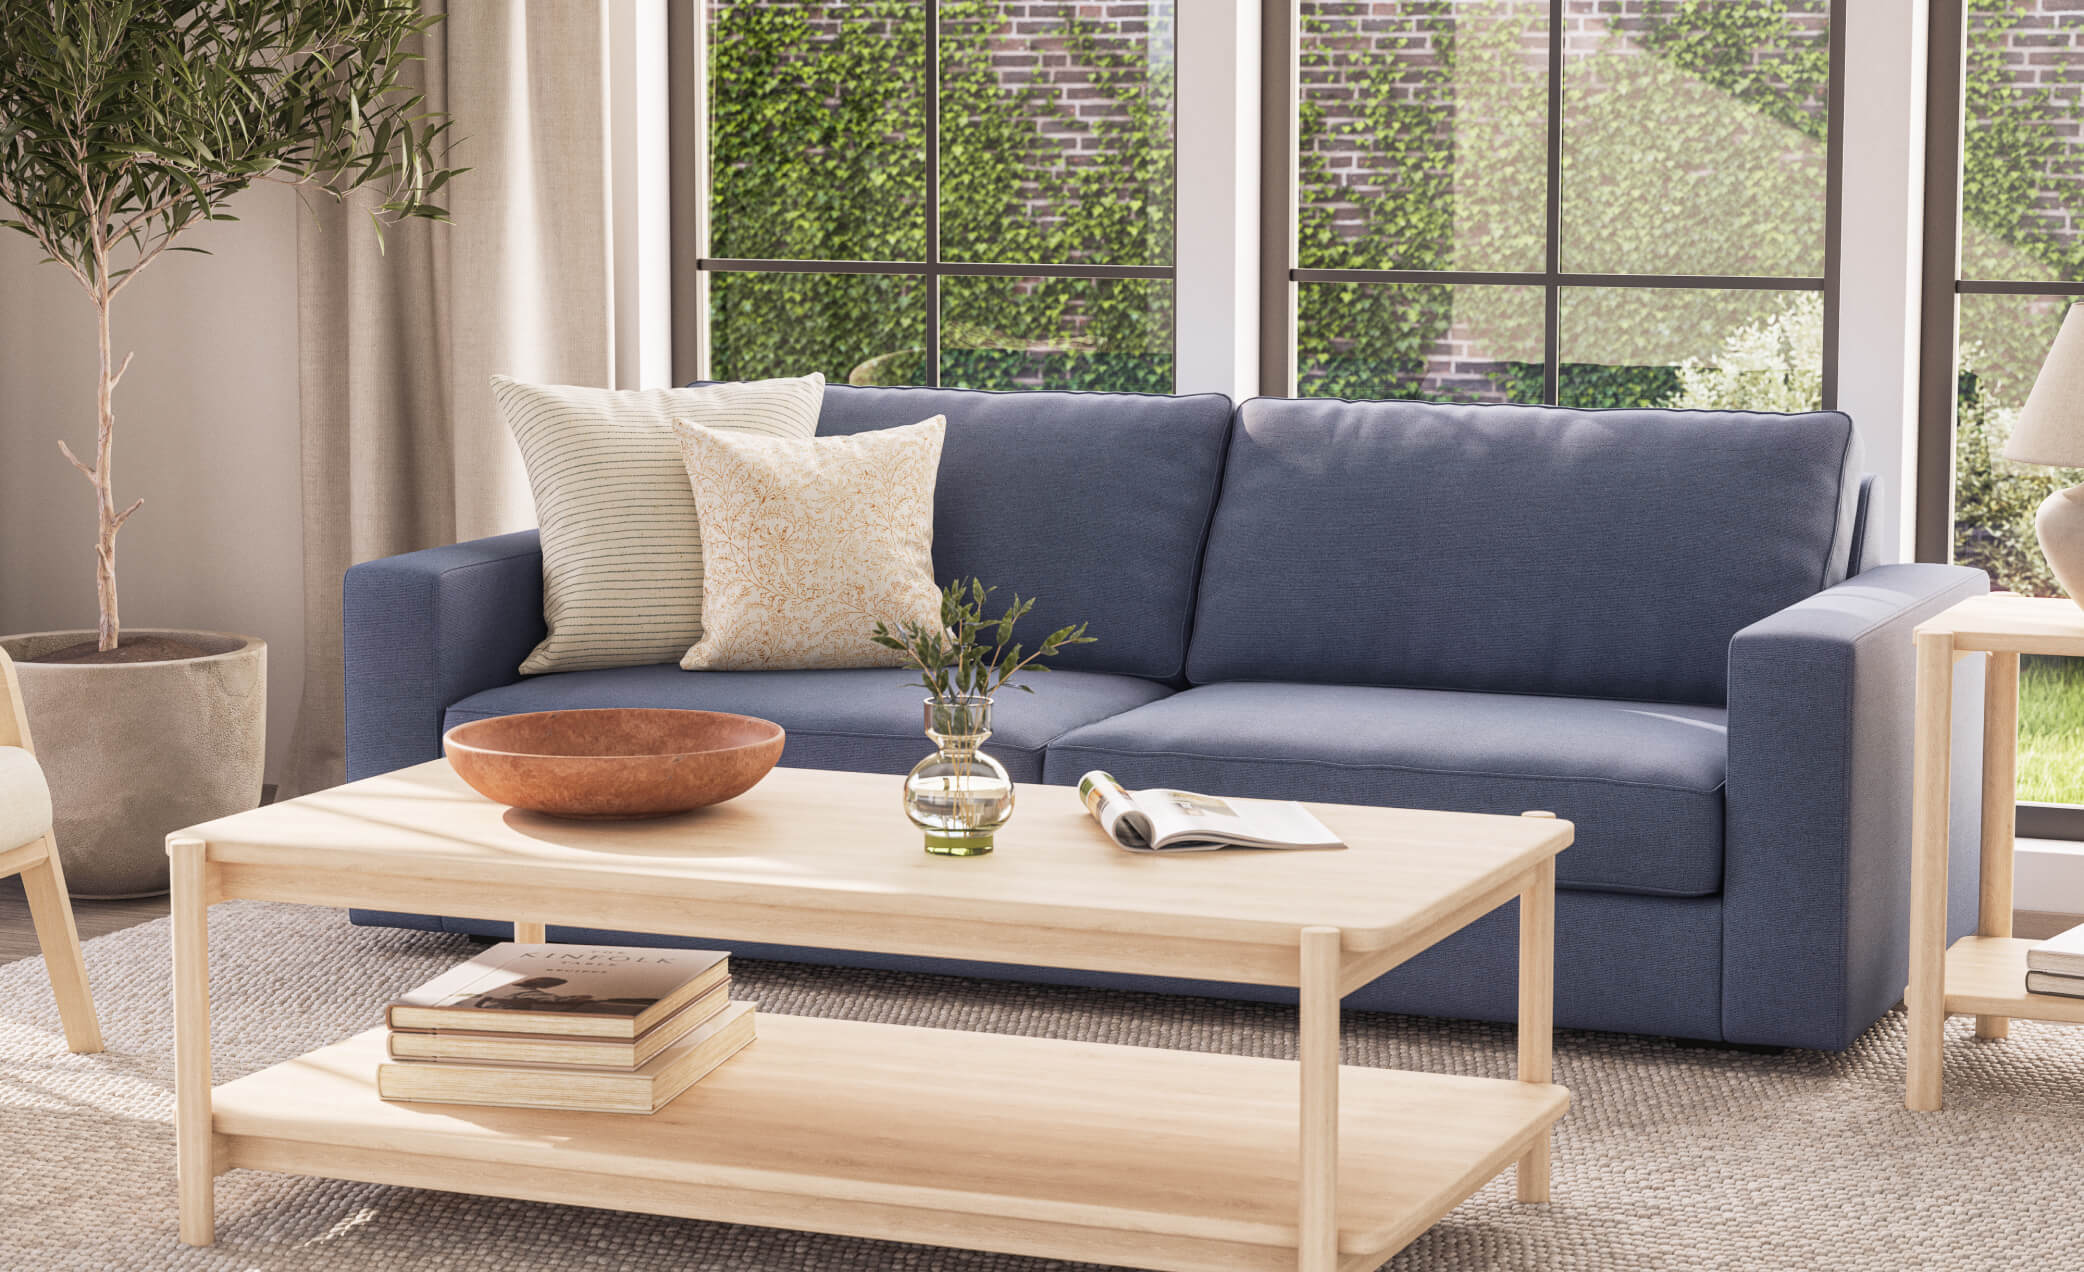 IRL: Iris Rectangular Coffee Table in Maple with Rio Sofa in Texture French Blue fabric